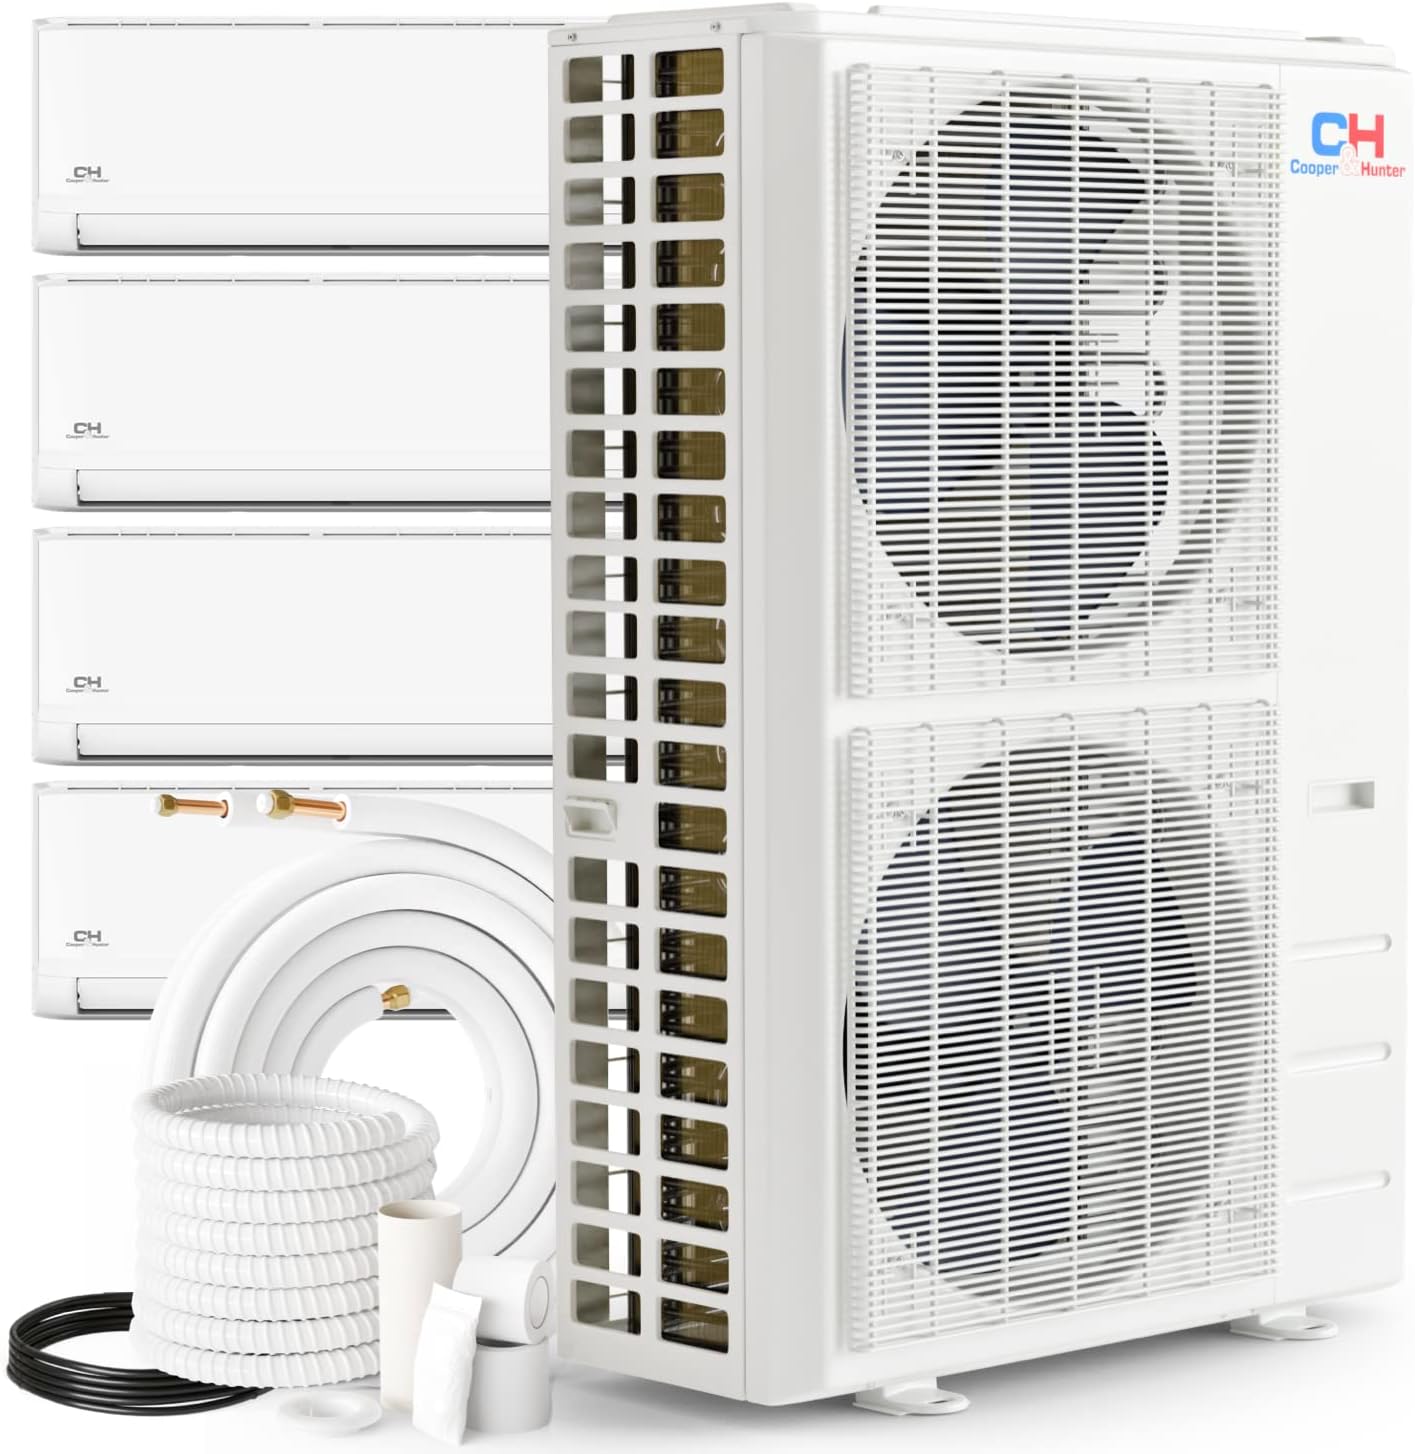 Cooper & Hunter OLIVIA Series 55,000 BTU 20.5 SEER (4) Four Zone 6000 6000 6000 36000 BTU Multi Zone Ductless Mini Split Air Conditioner and Heater Full Set with 25ft Installation Kits